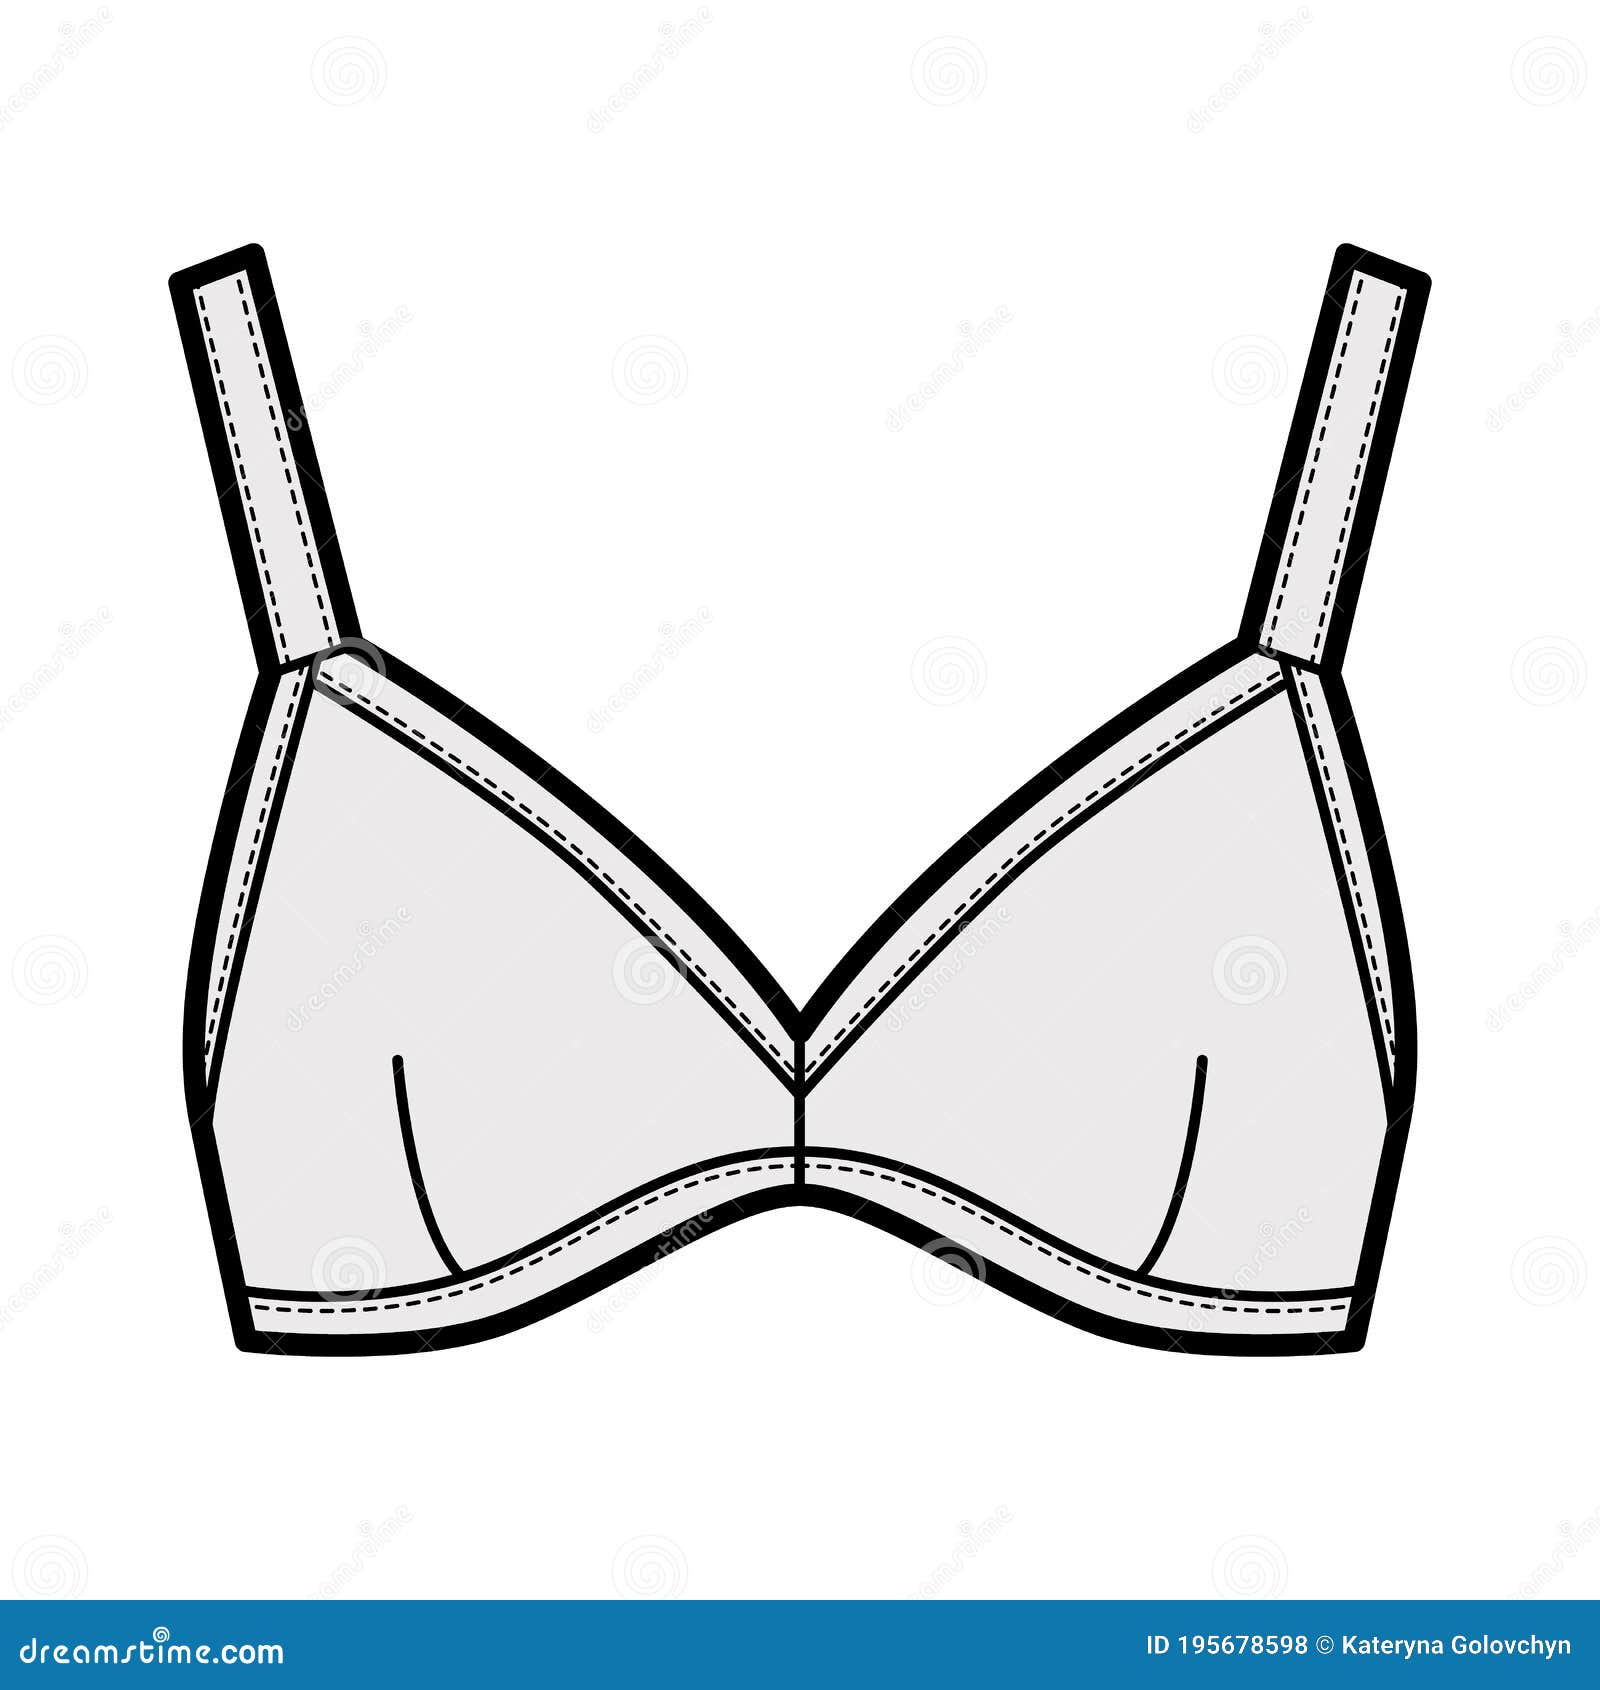 Bustier Top Bralette Technical Fashion Illustration with Adjustable ...